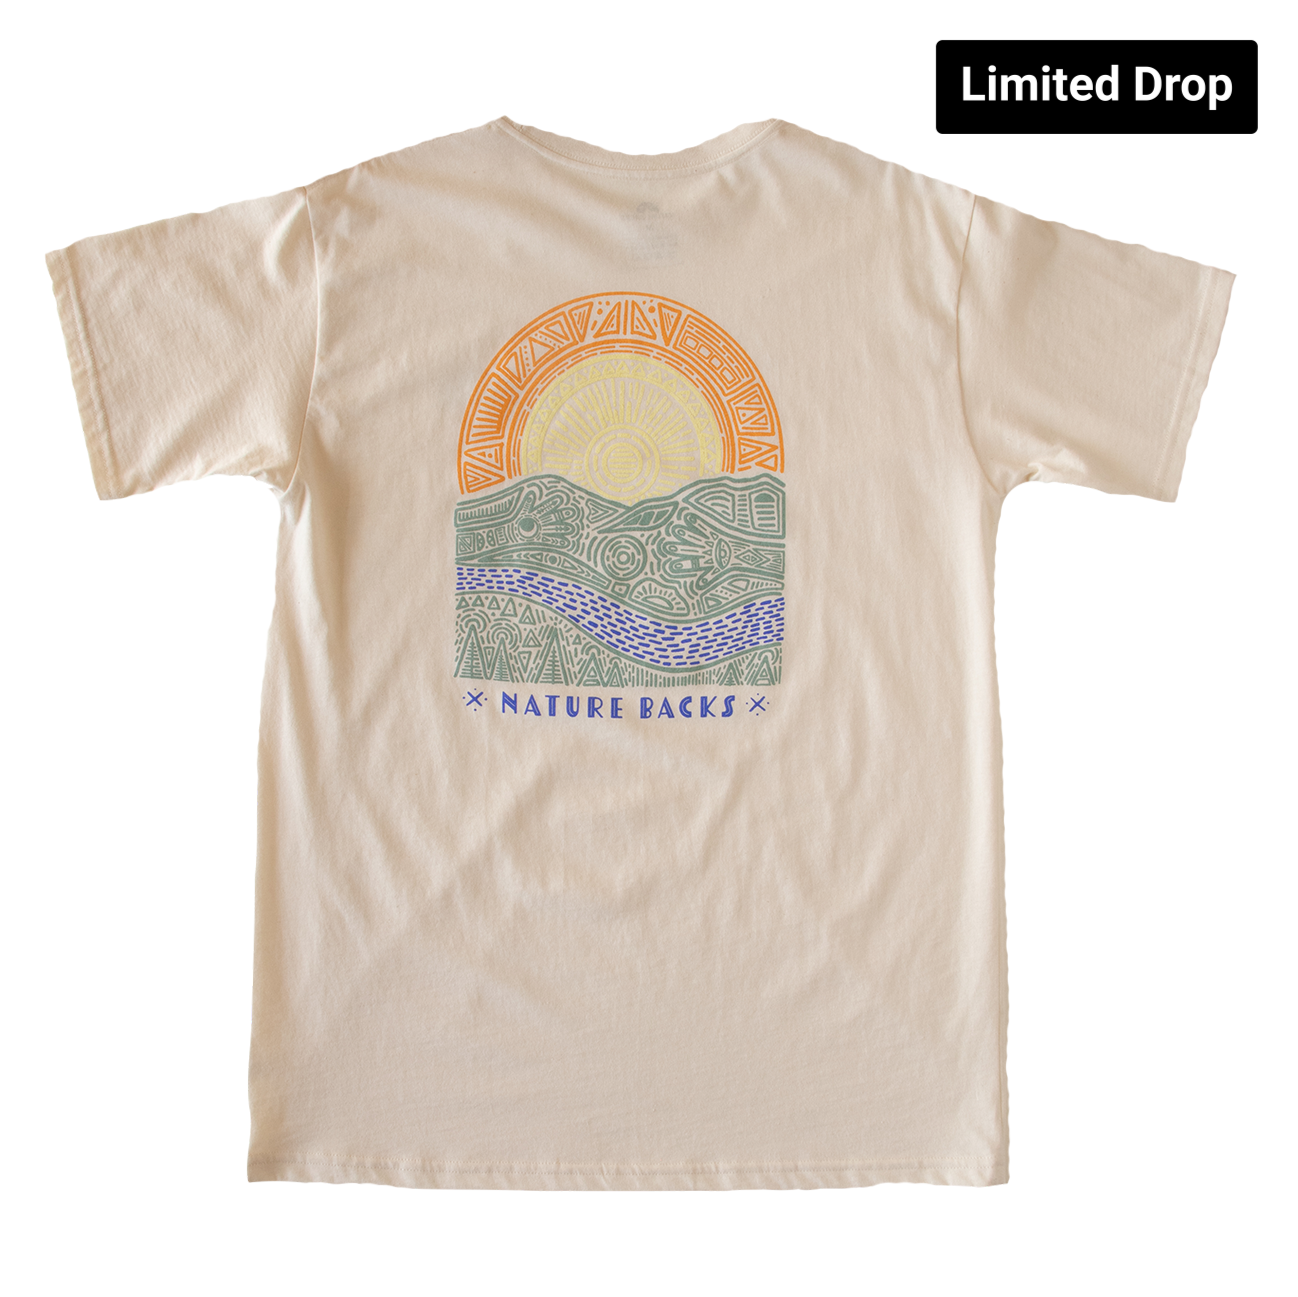 Nature Backs Limited Edition Short Sleeve 100% Organic Cotton T-Shirt | Limited Origin Natural Short Sleeve made with Eco-Friendly Fibers Sustainably made in the USA 